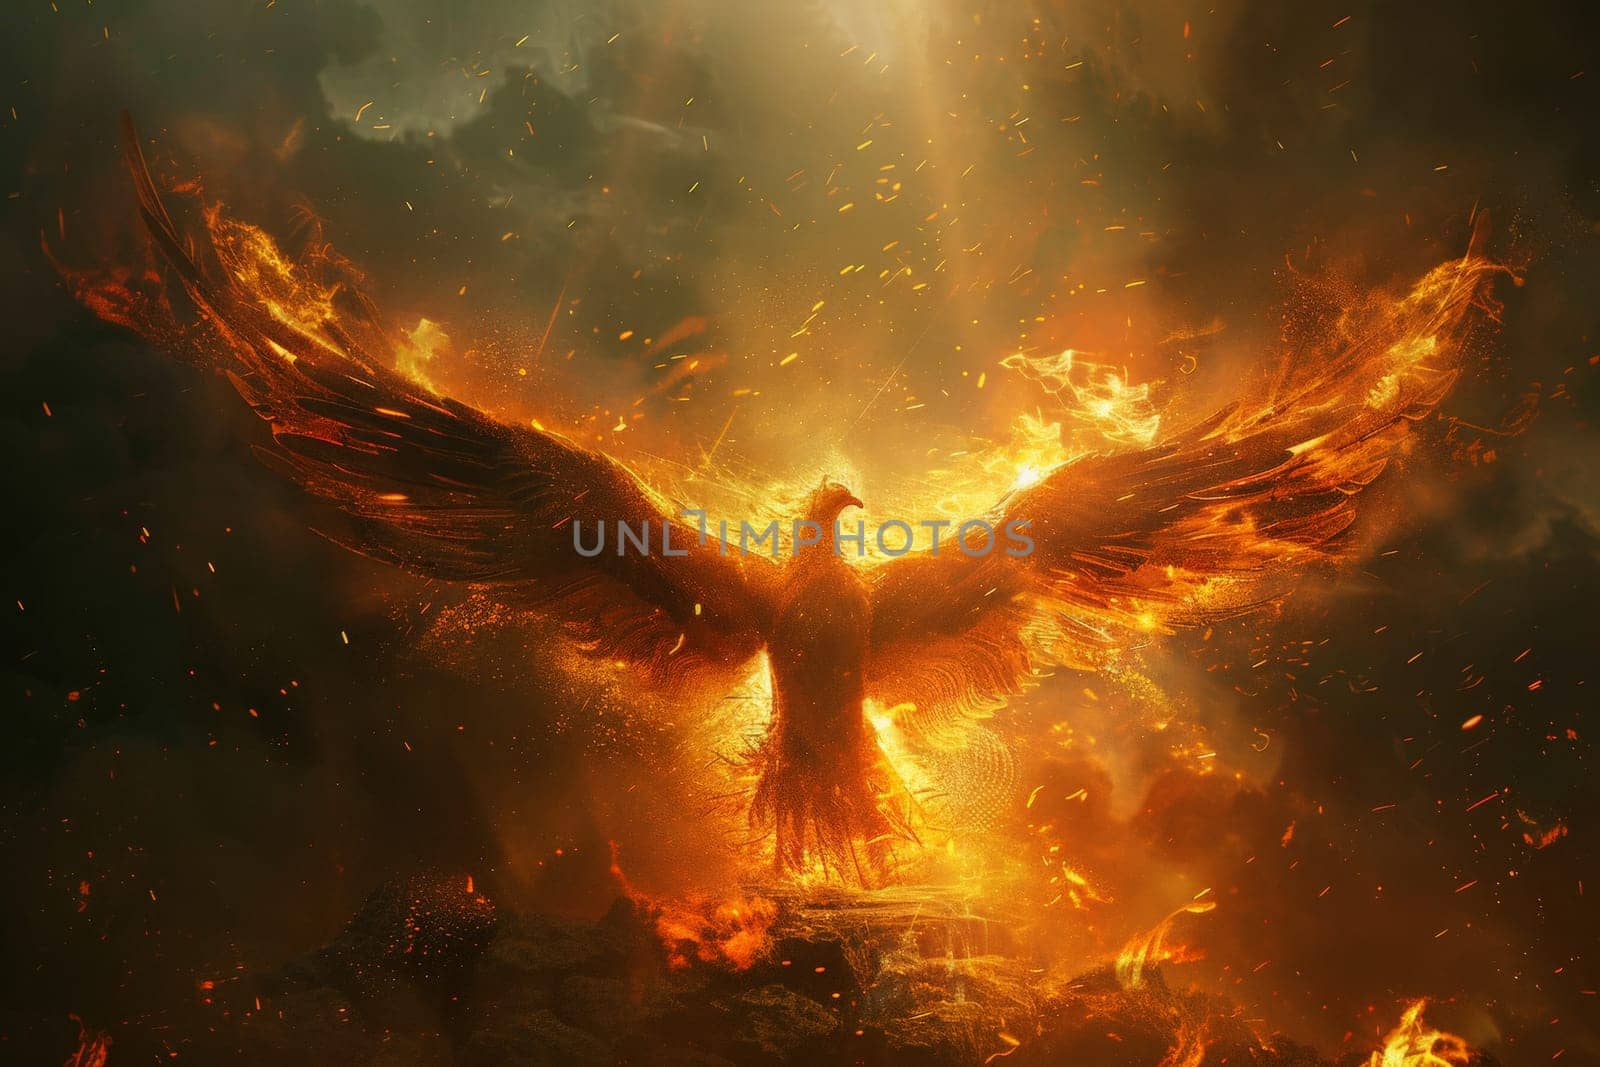 A fiery bird with its wings spread out in the sky. The bird is surrounded by fire and smoke, creating a sense of danger and chaos. The image conveys a feeling of destruction and the power of nature